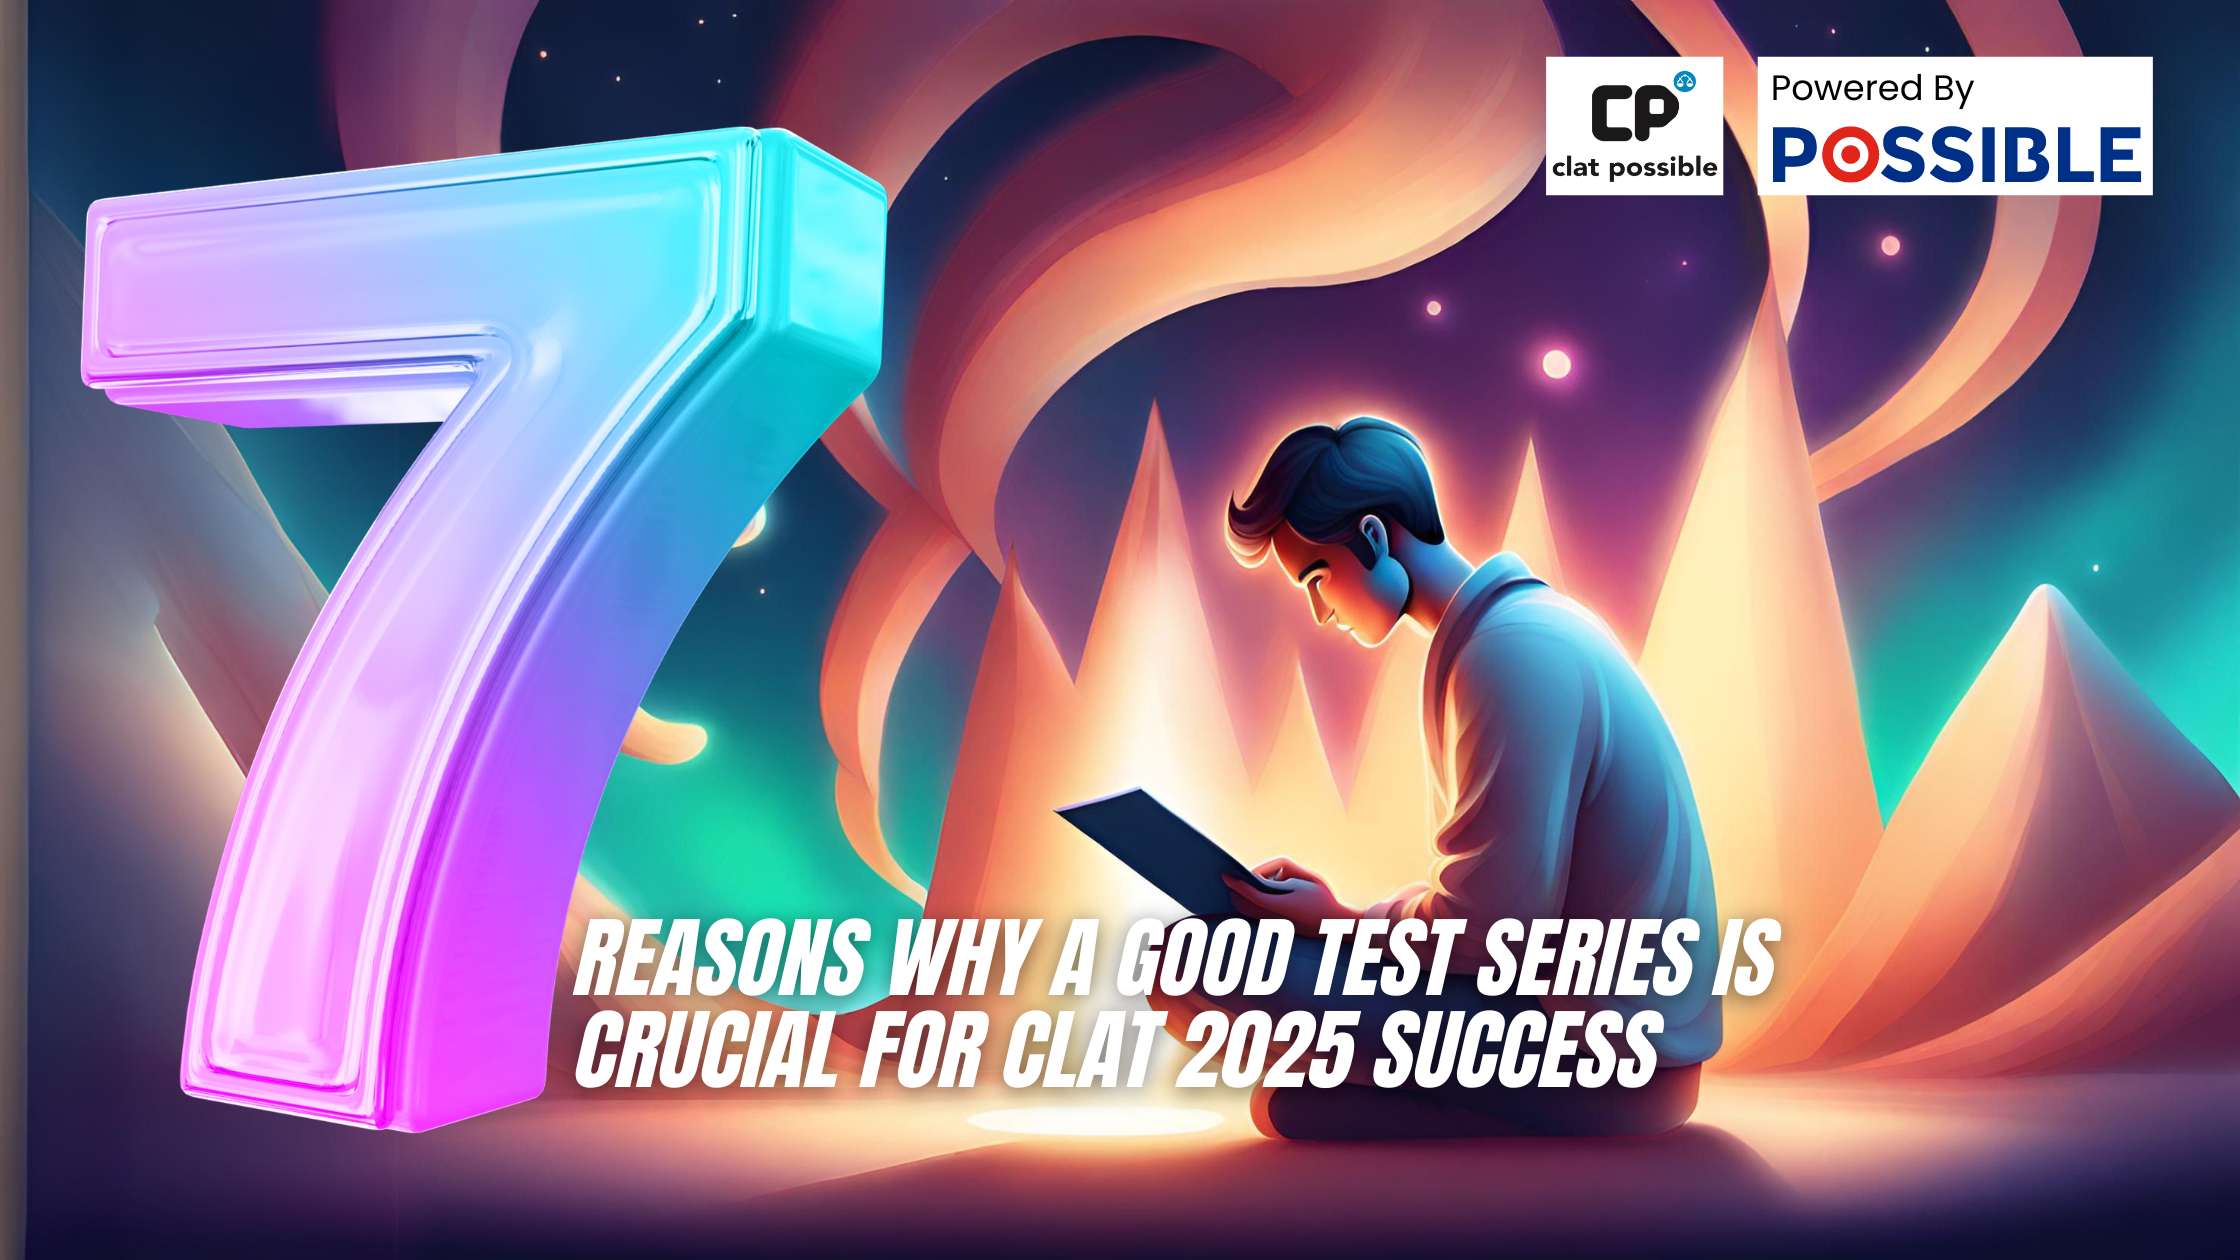 7 Reasons Why a Good Test Series is Crucial for CLAT 2025 Success